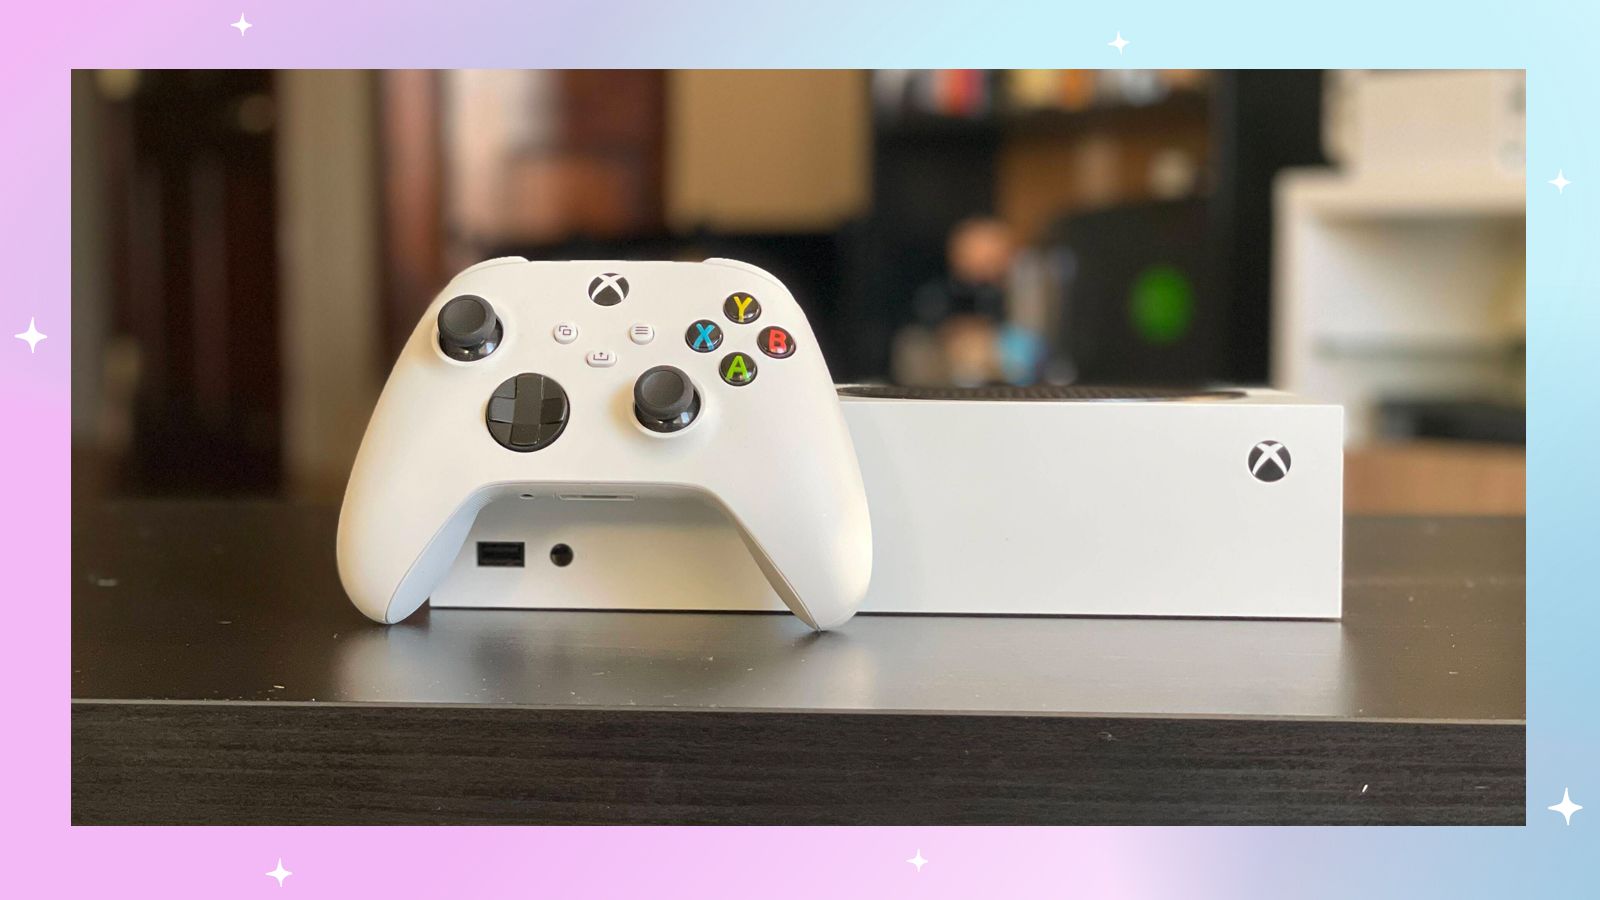 Visa Mens ramp Xbox Series S at lowest price ever for Cyber Monday 2022 | CNN Underscored